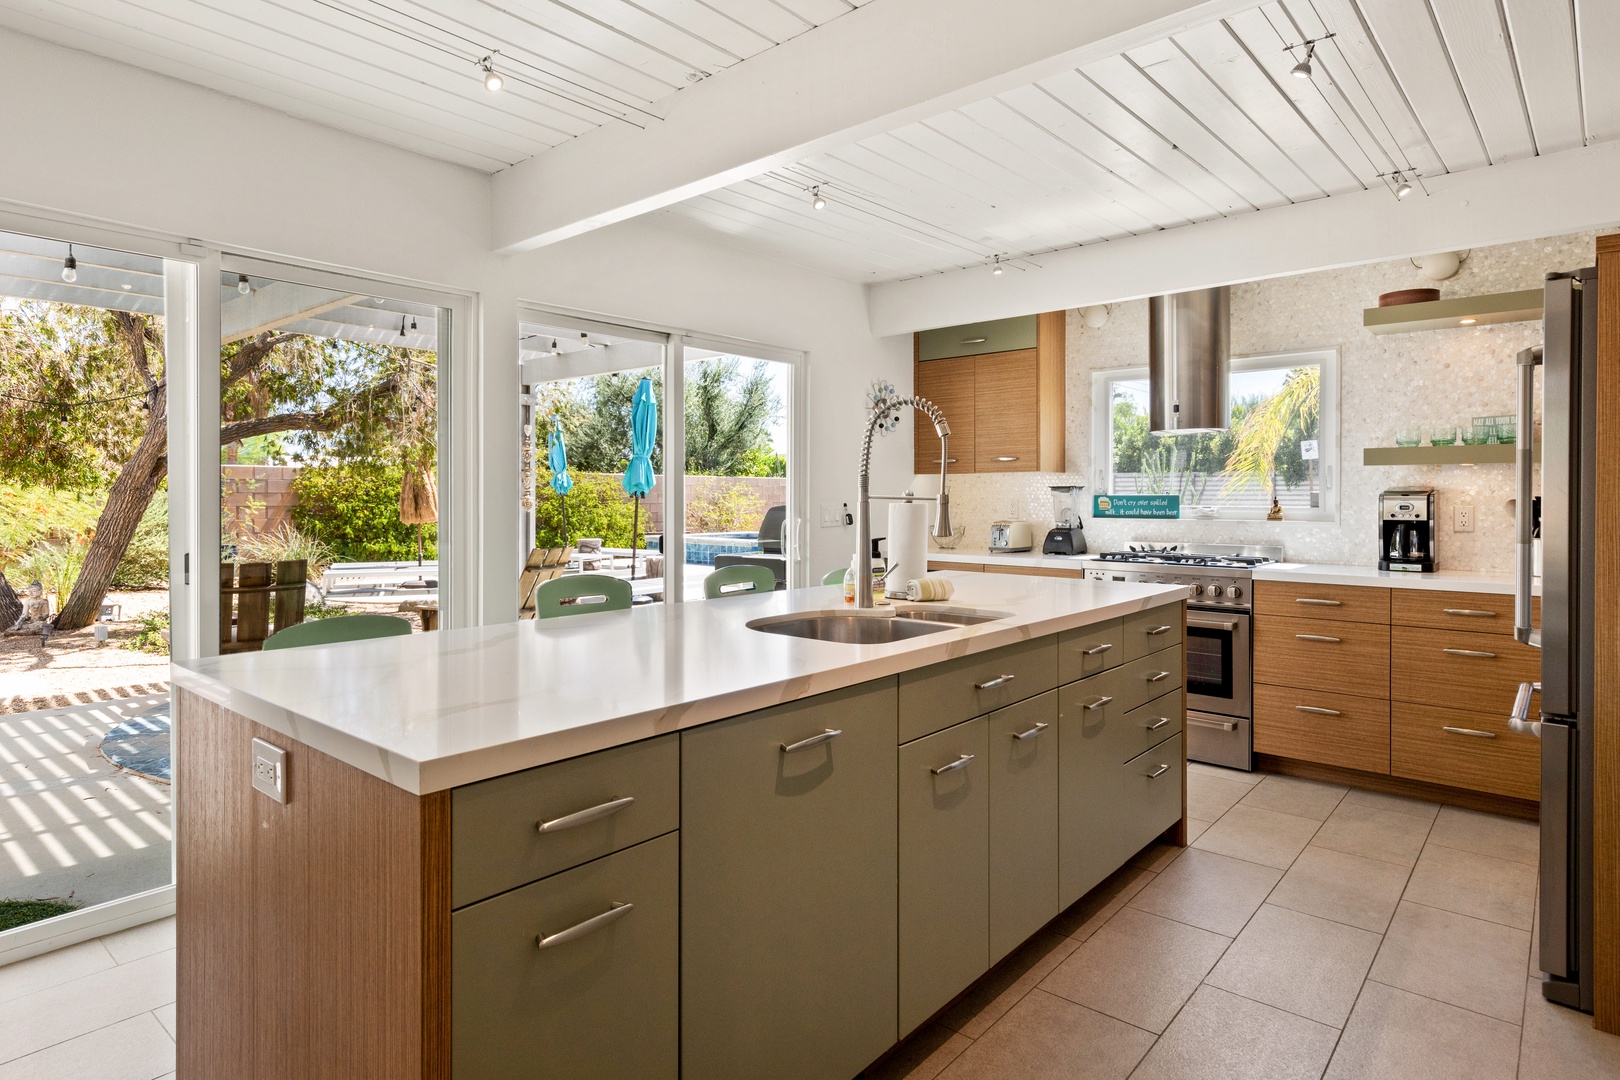 Kitchen grants you access outdoors